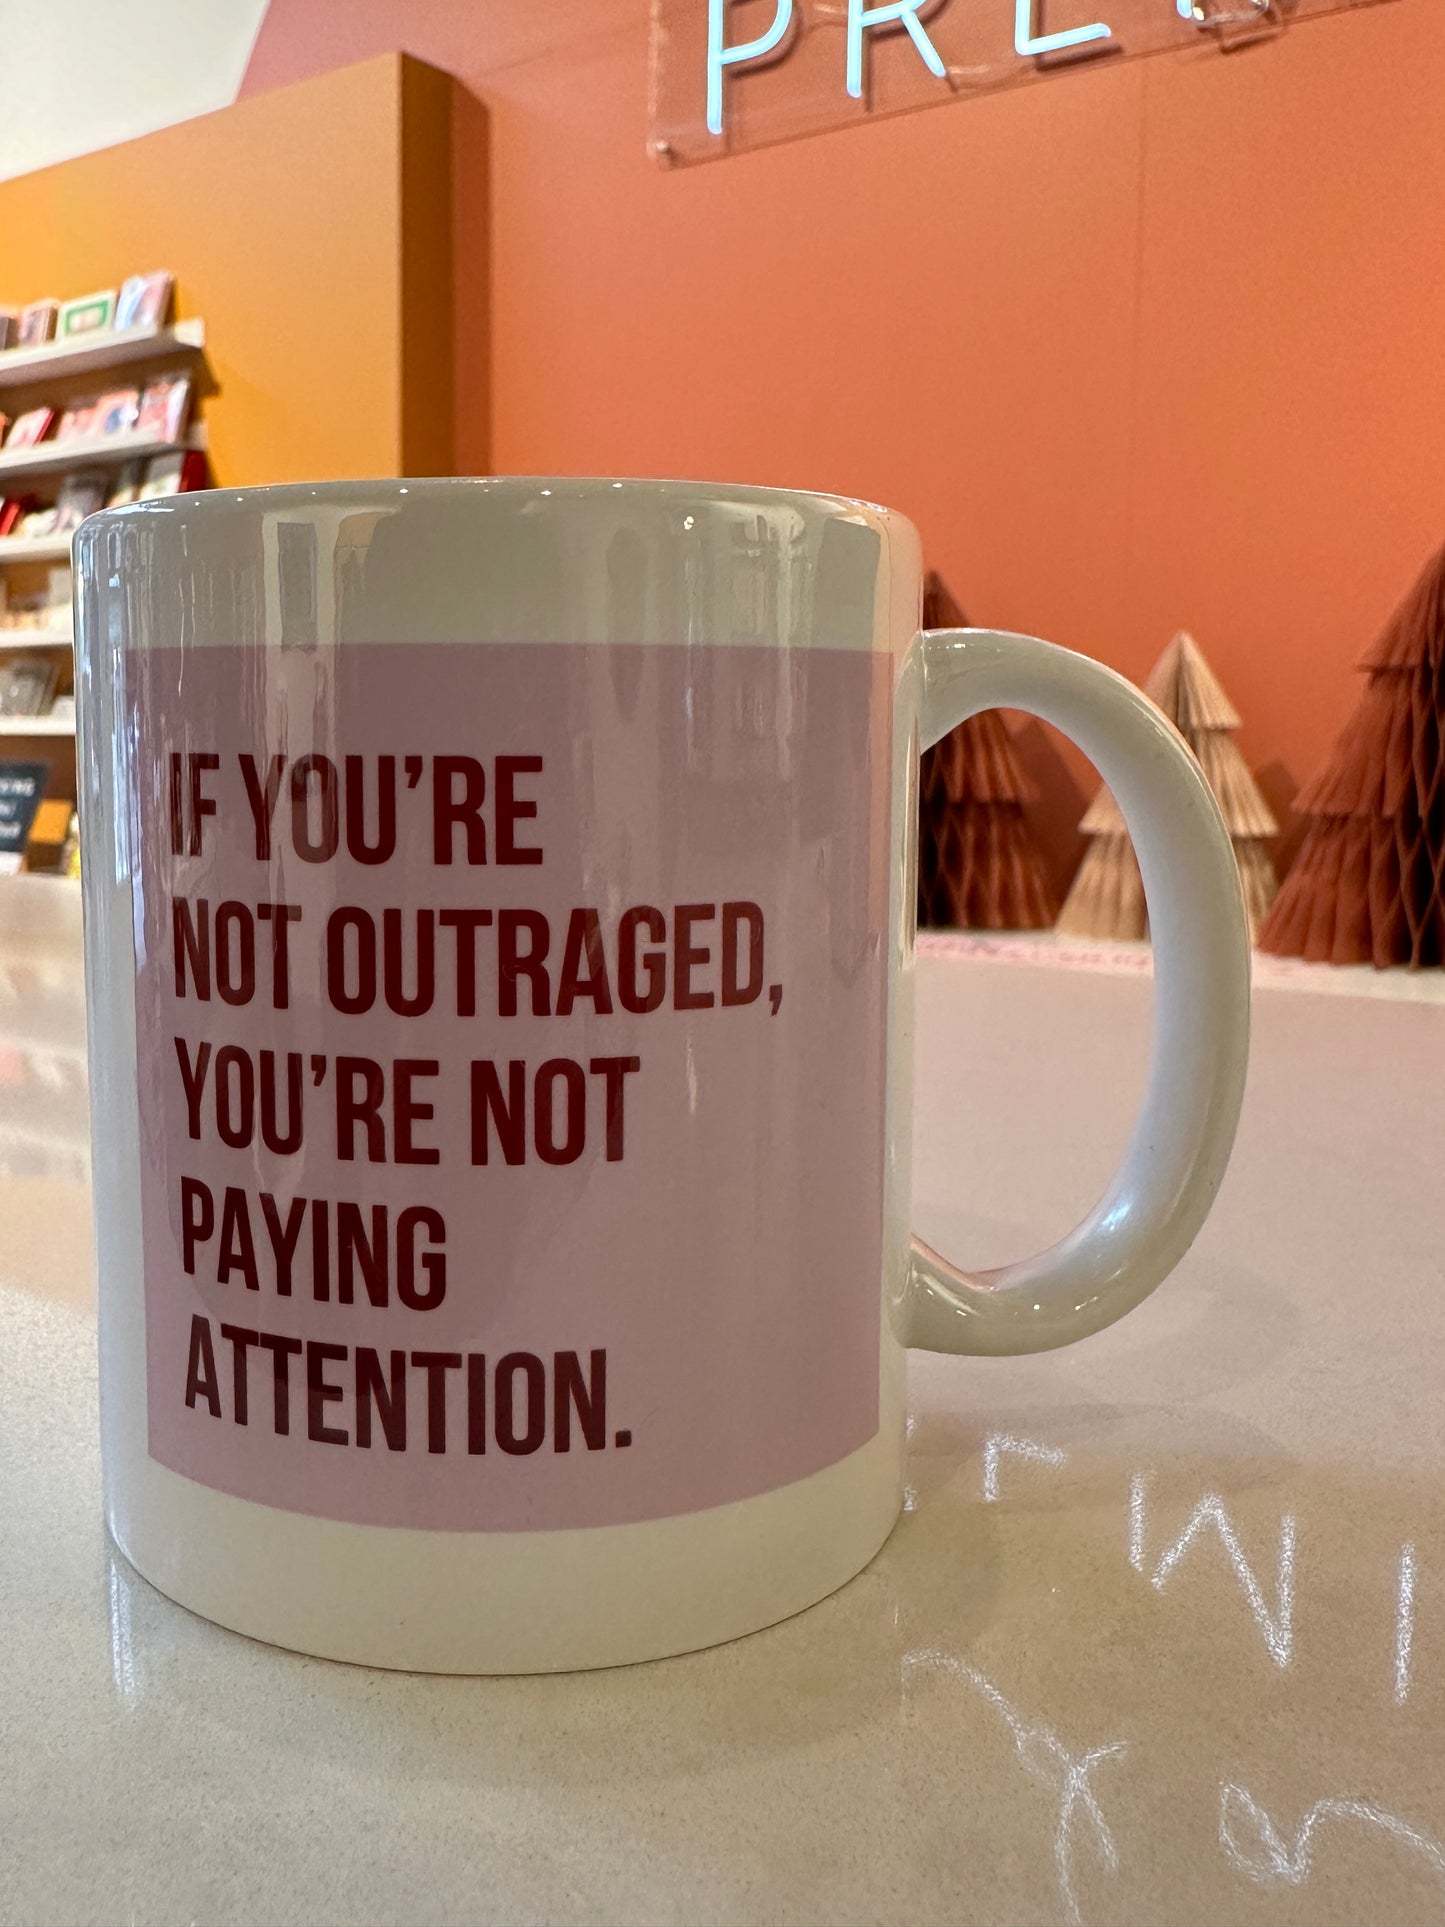 Madame Premier If You’re Not Outraged, You’re Not Paying Attention Mug